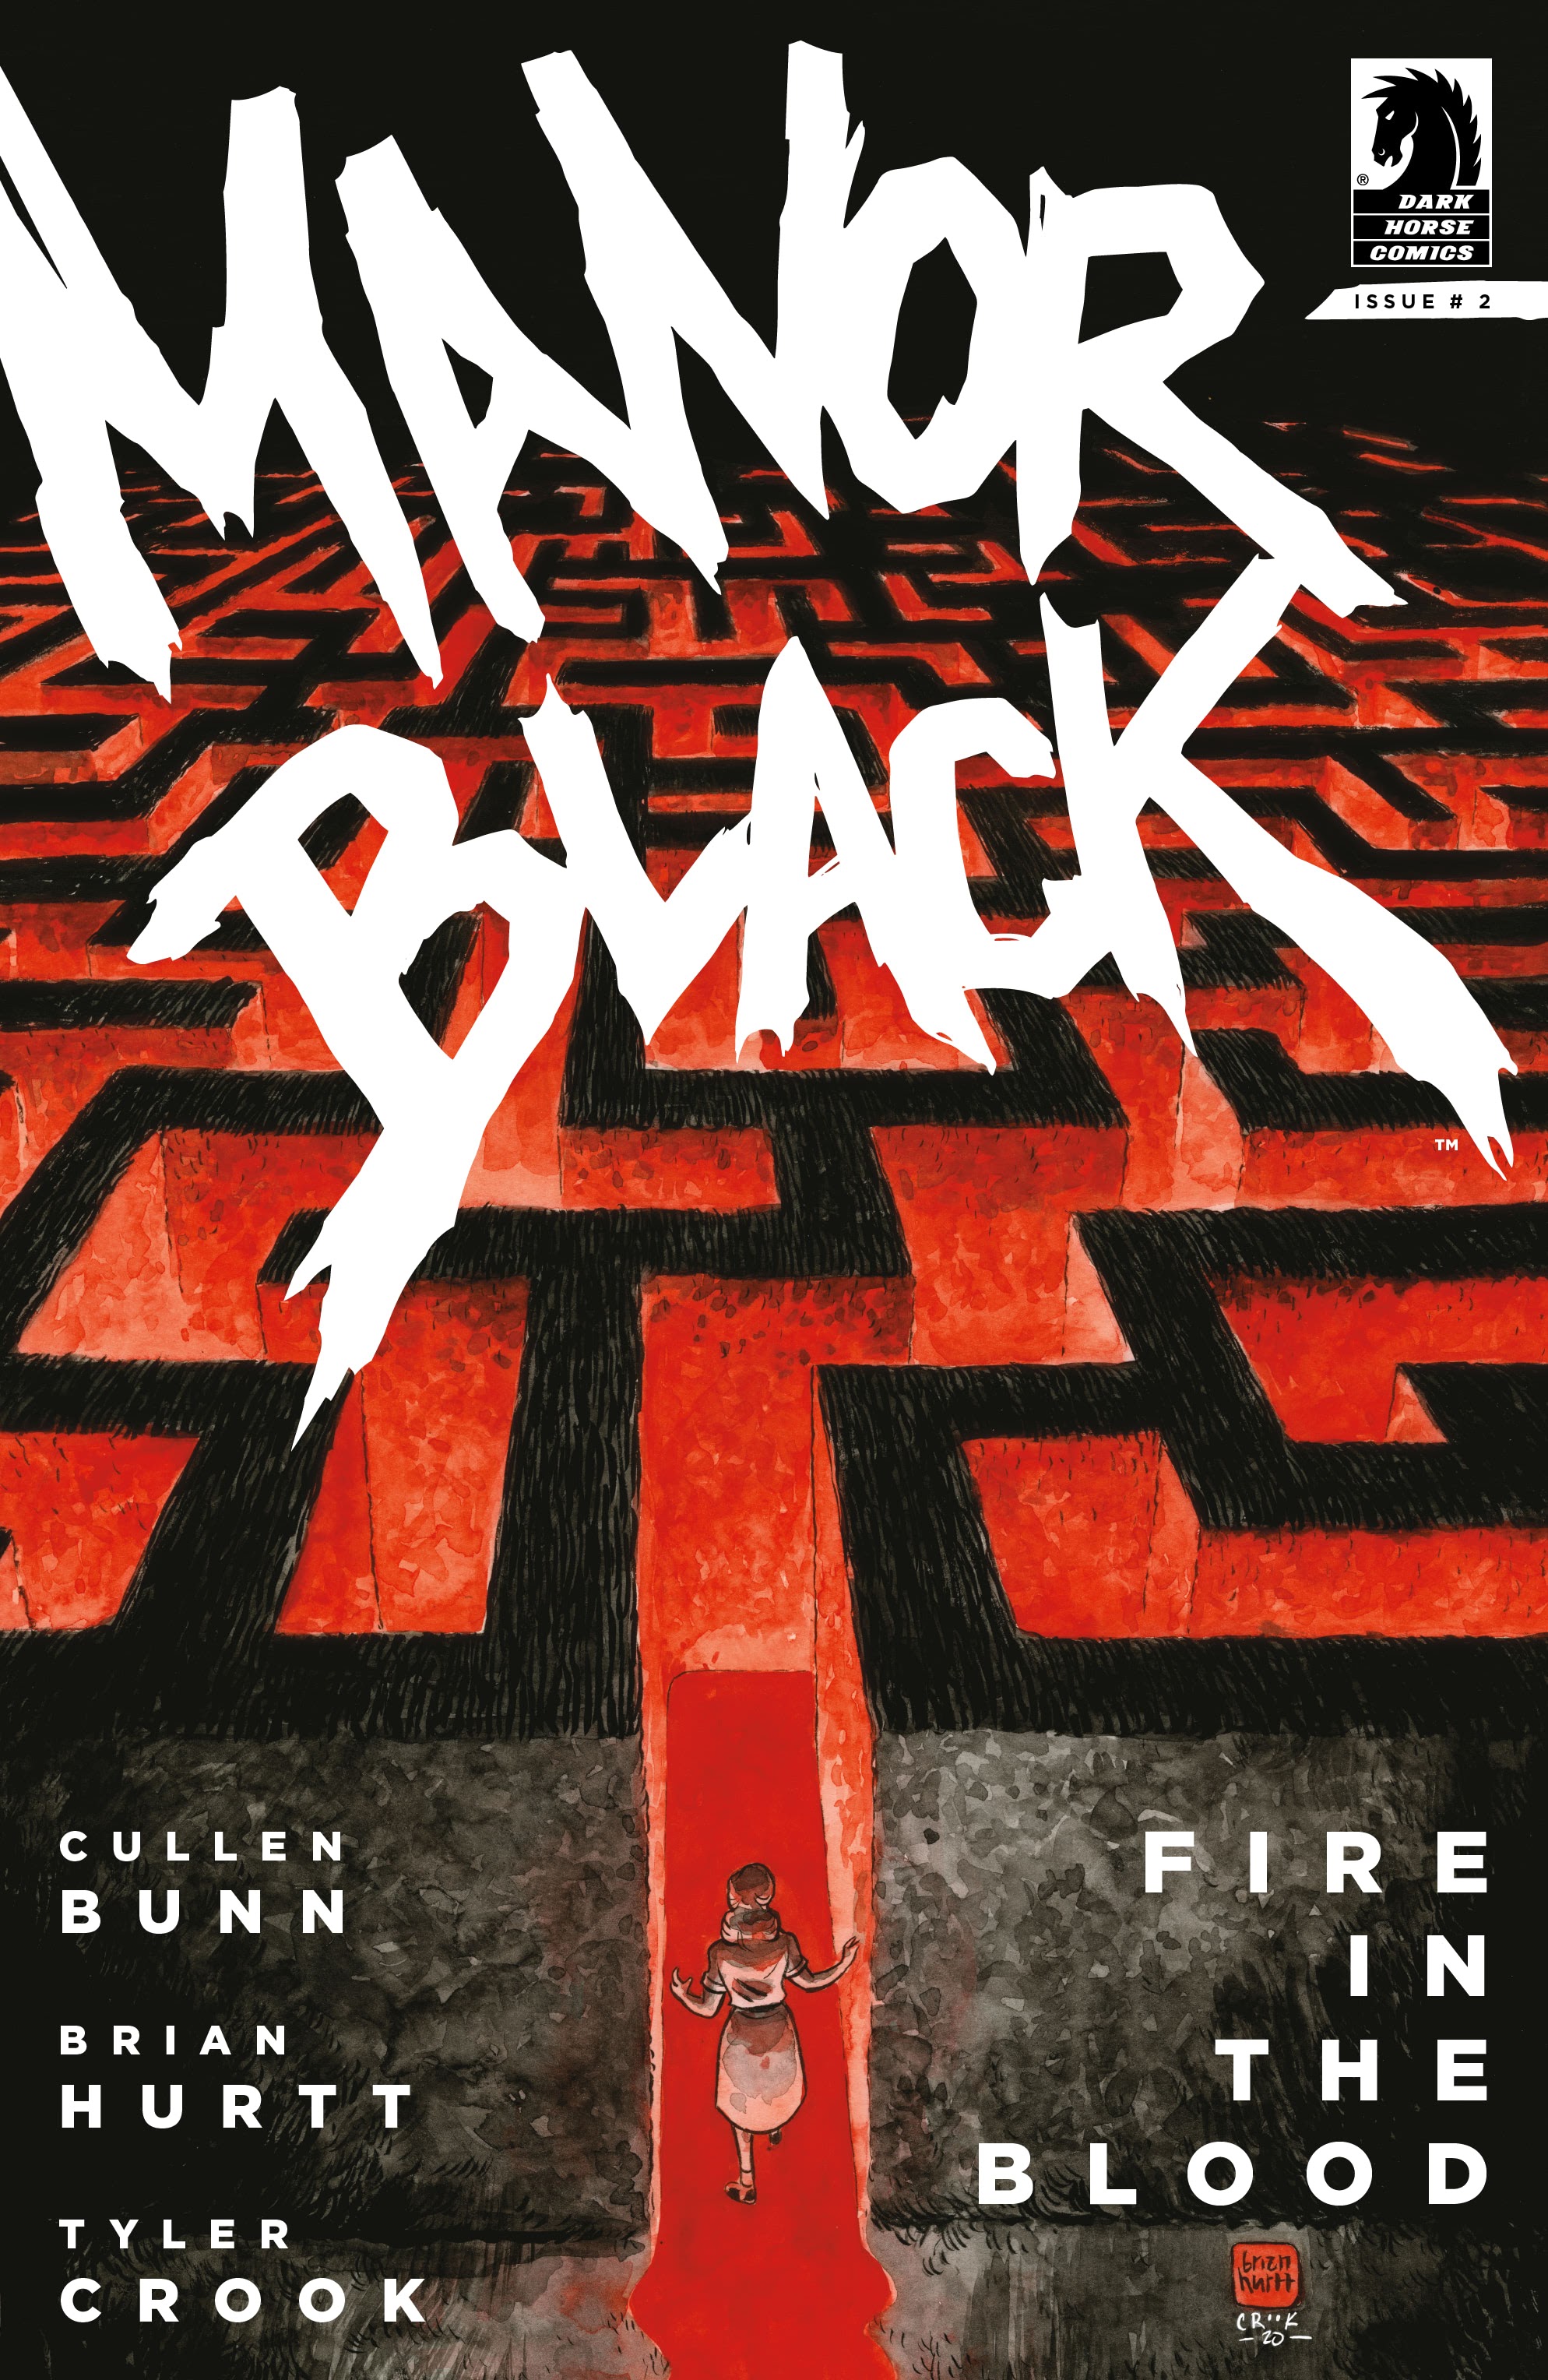 Read online Manor Black: Fire in the Blood comic -  Issue #2 - 1